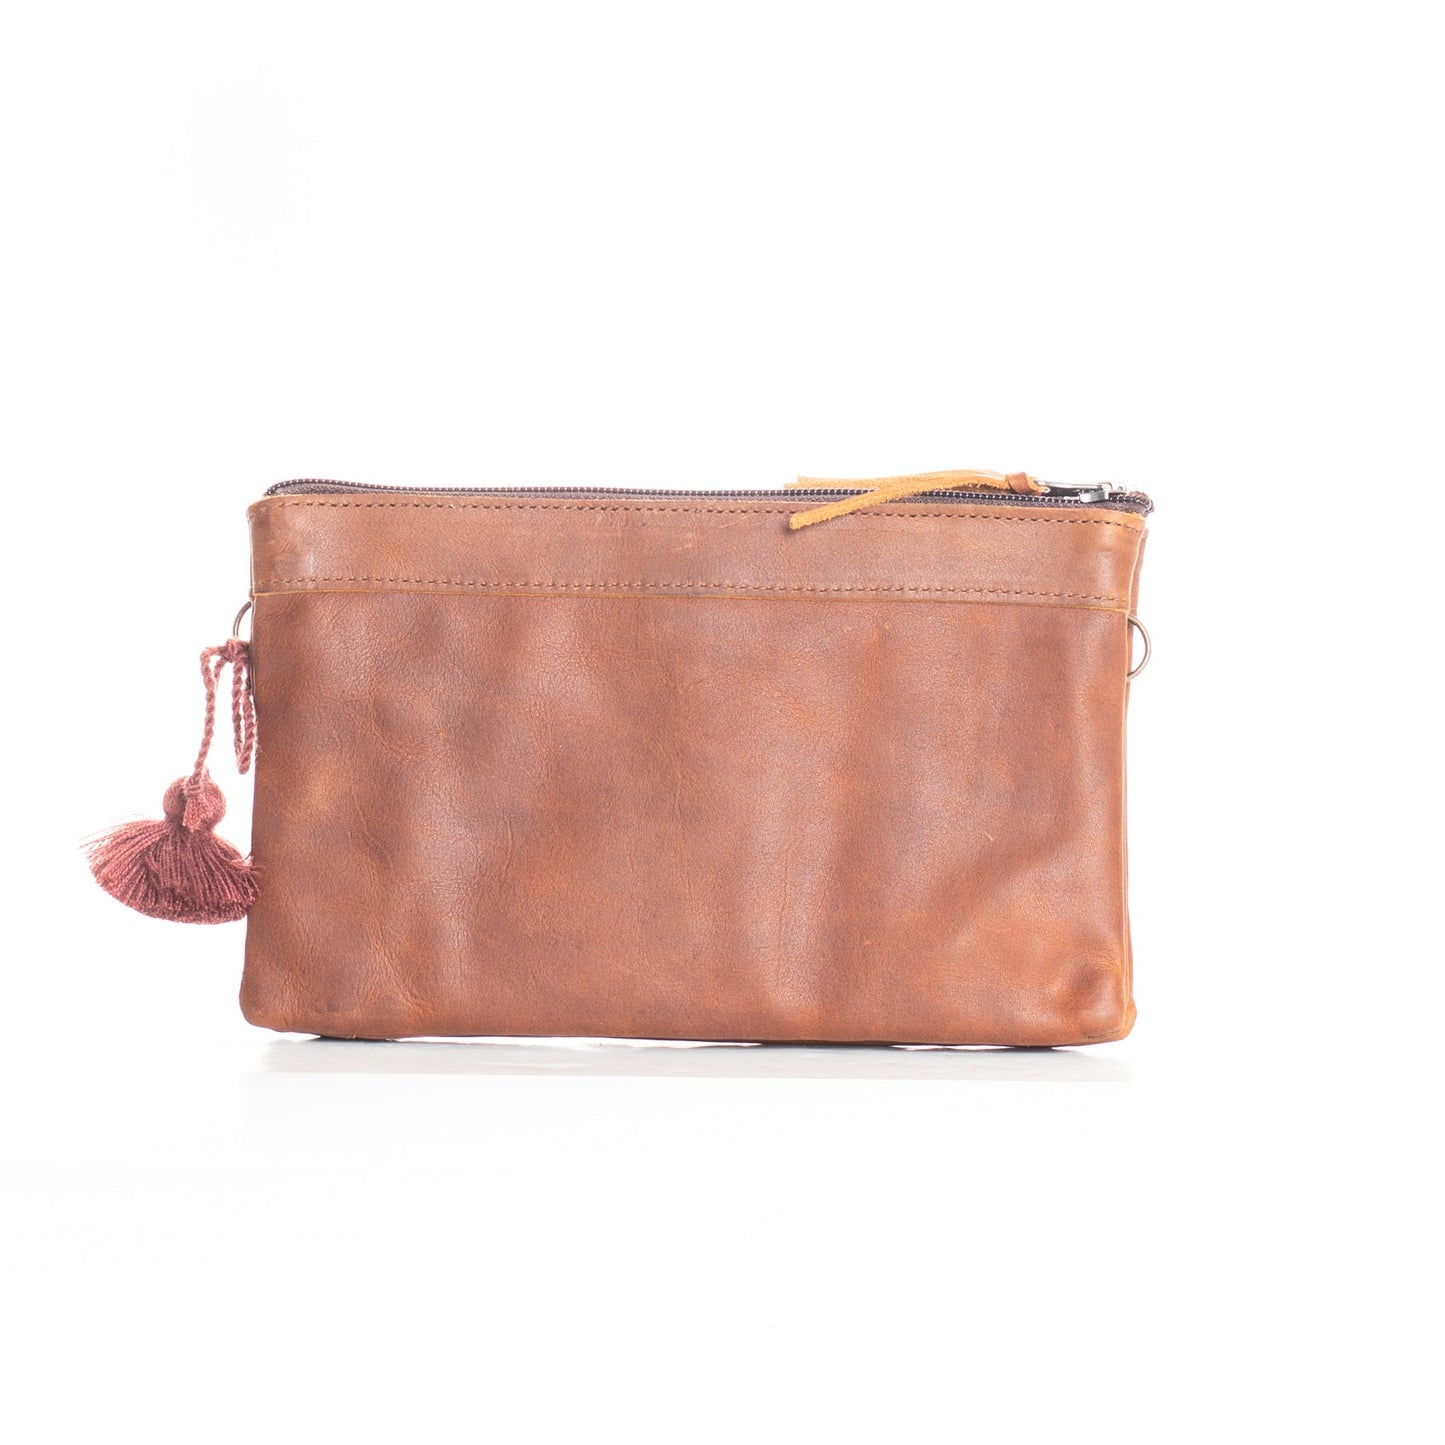 DOUBLE PERFECT CLUTCH - FULL LEATHER COLLECTION - CAFE LEATHER